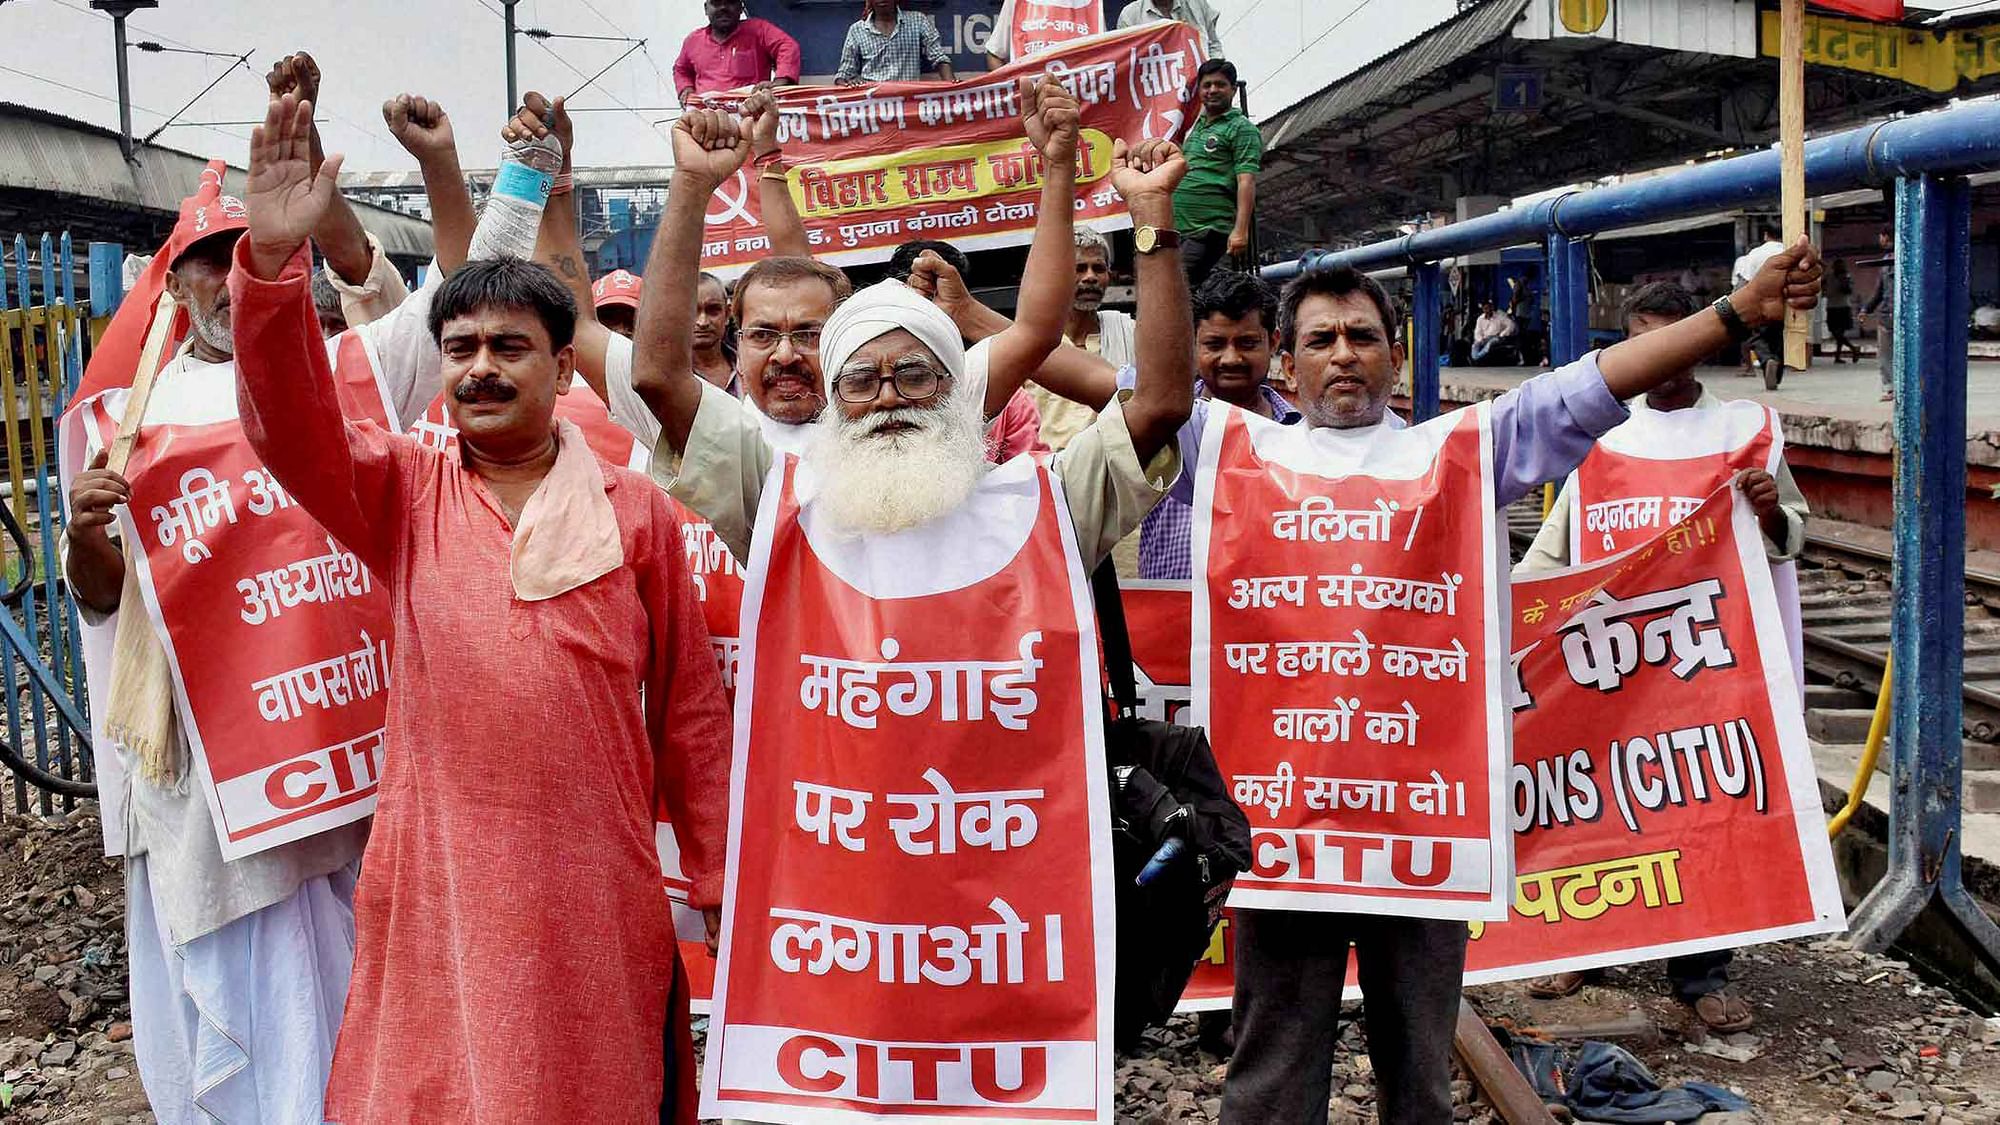 CITU activists participate in a rally in support of the strike to protest against the proposed labour reforms by Central and State government (Photo: PTI)